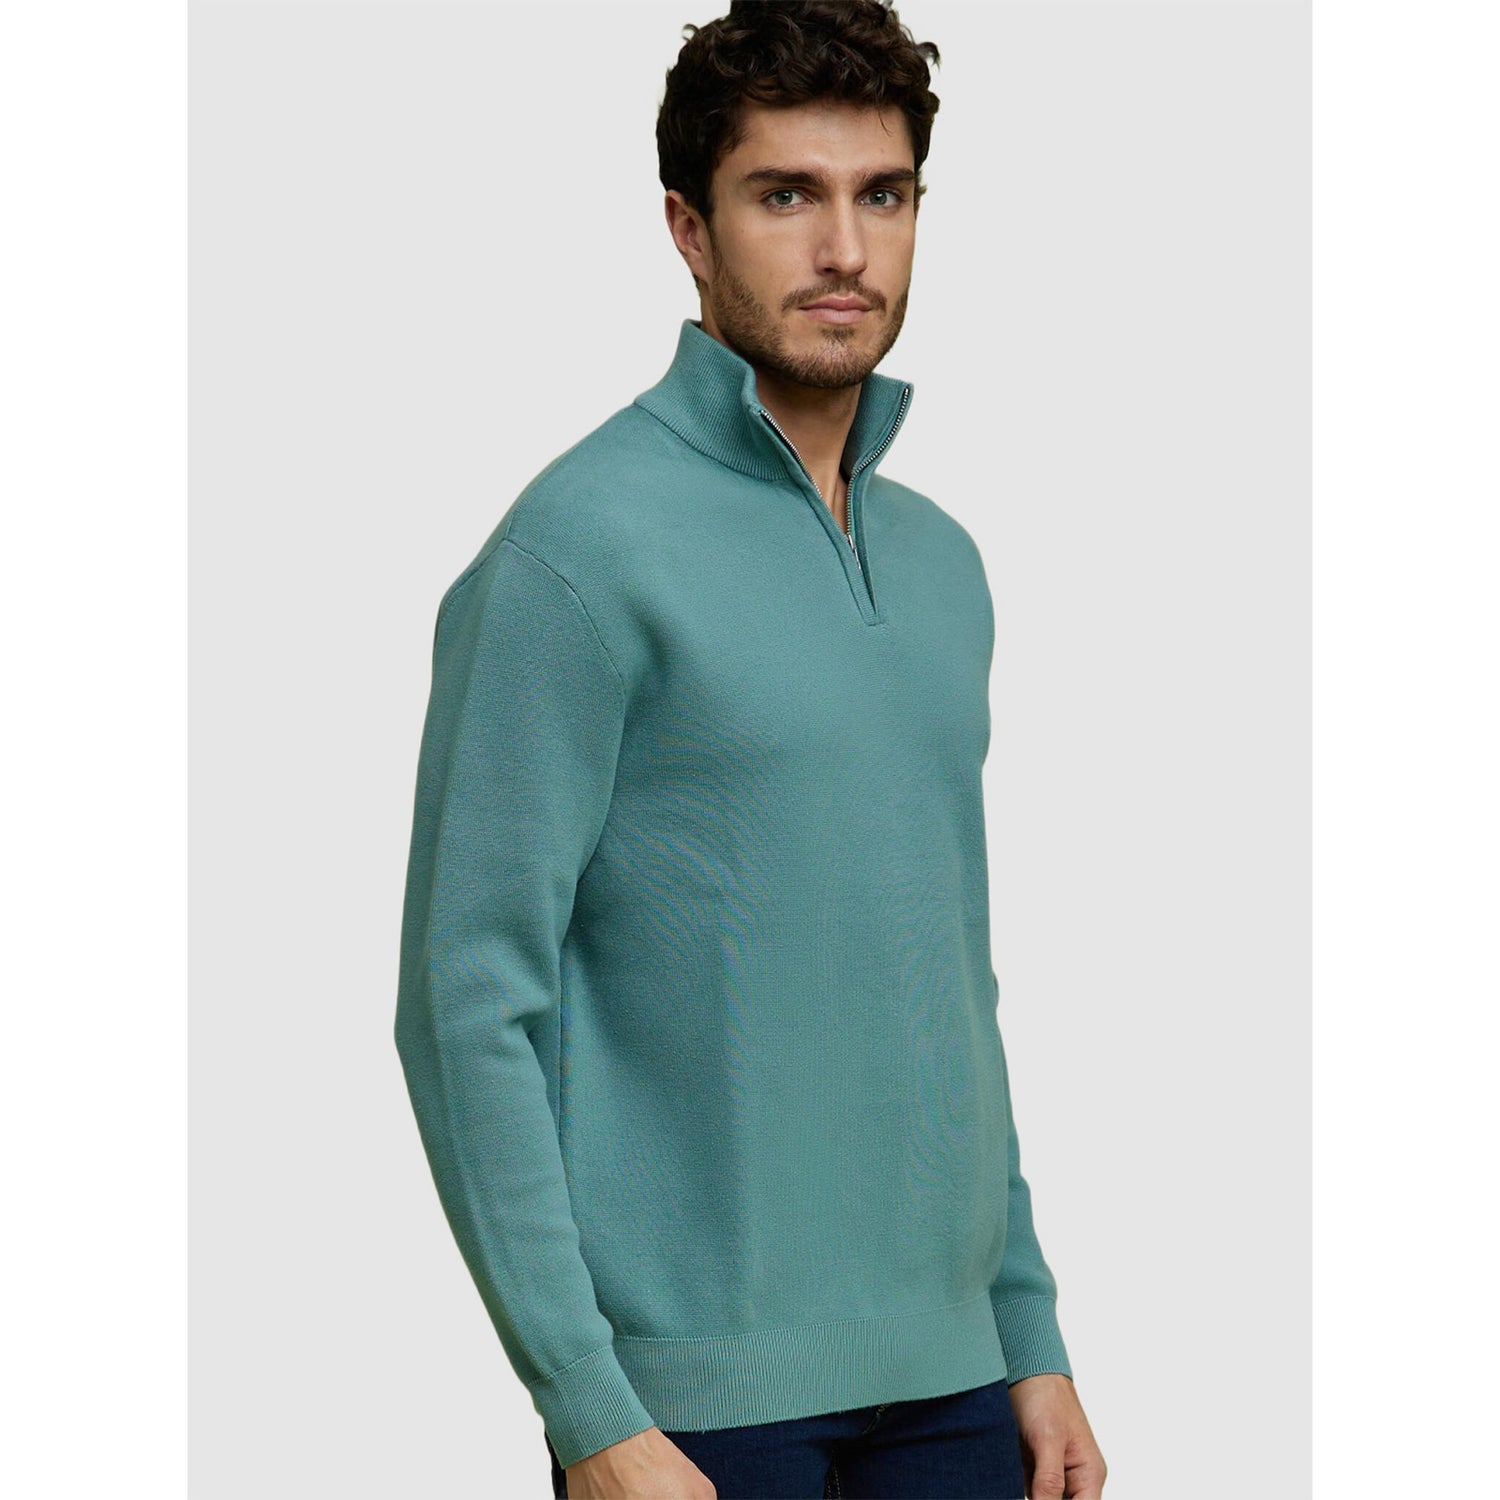 Men's Green Solid Sweaters (Various Sizes)